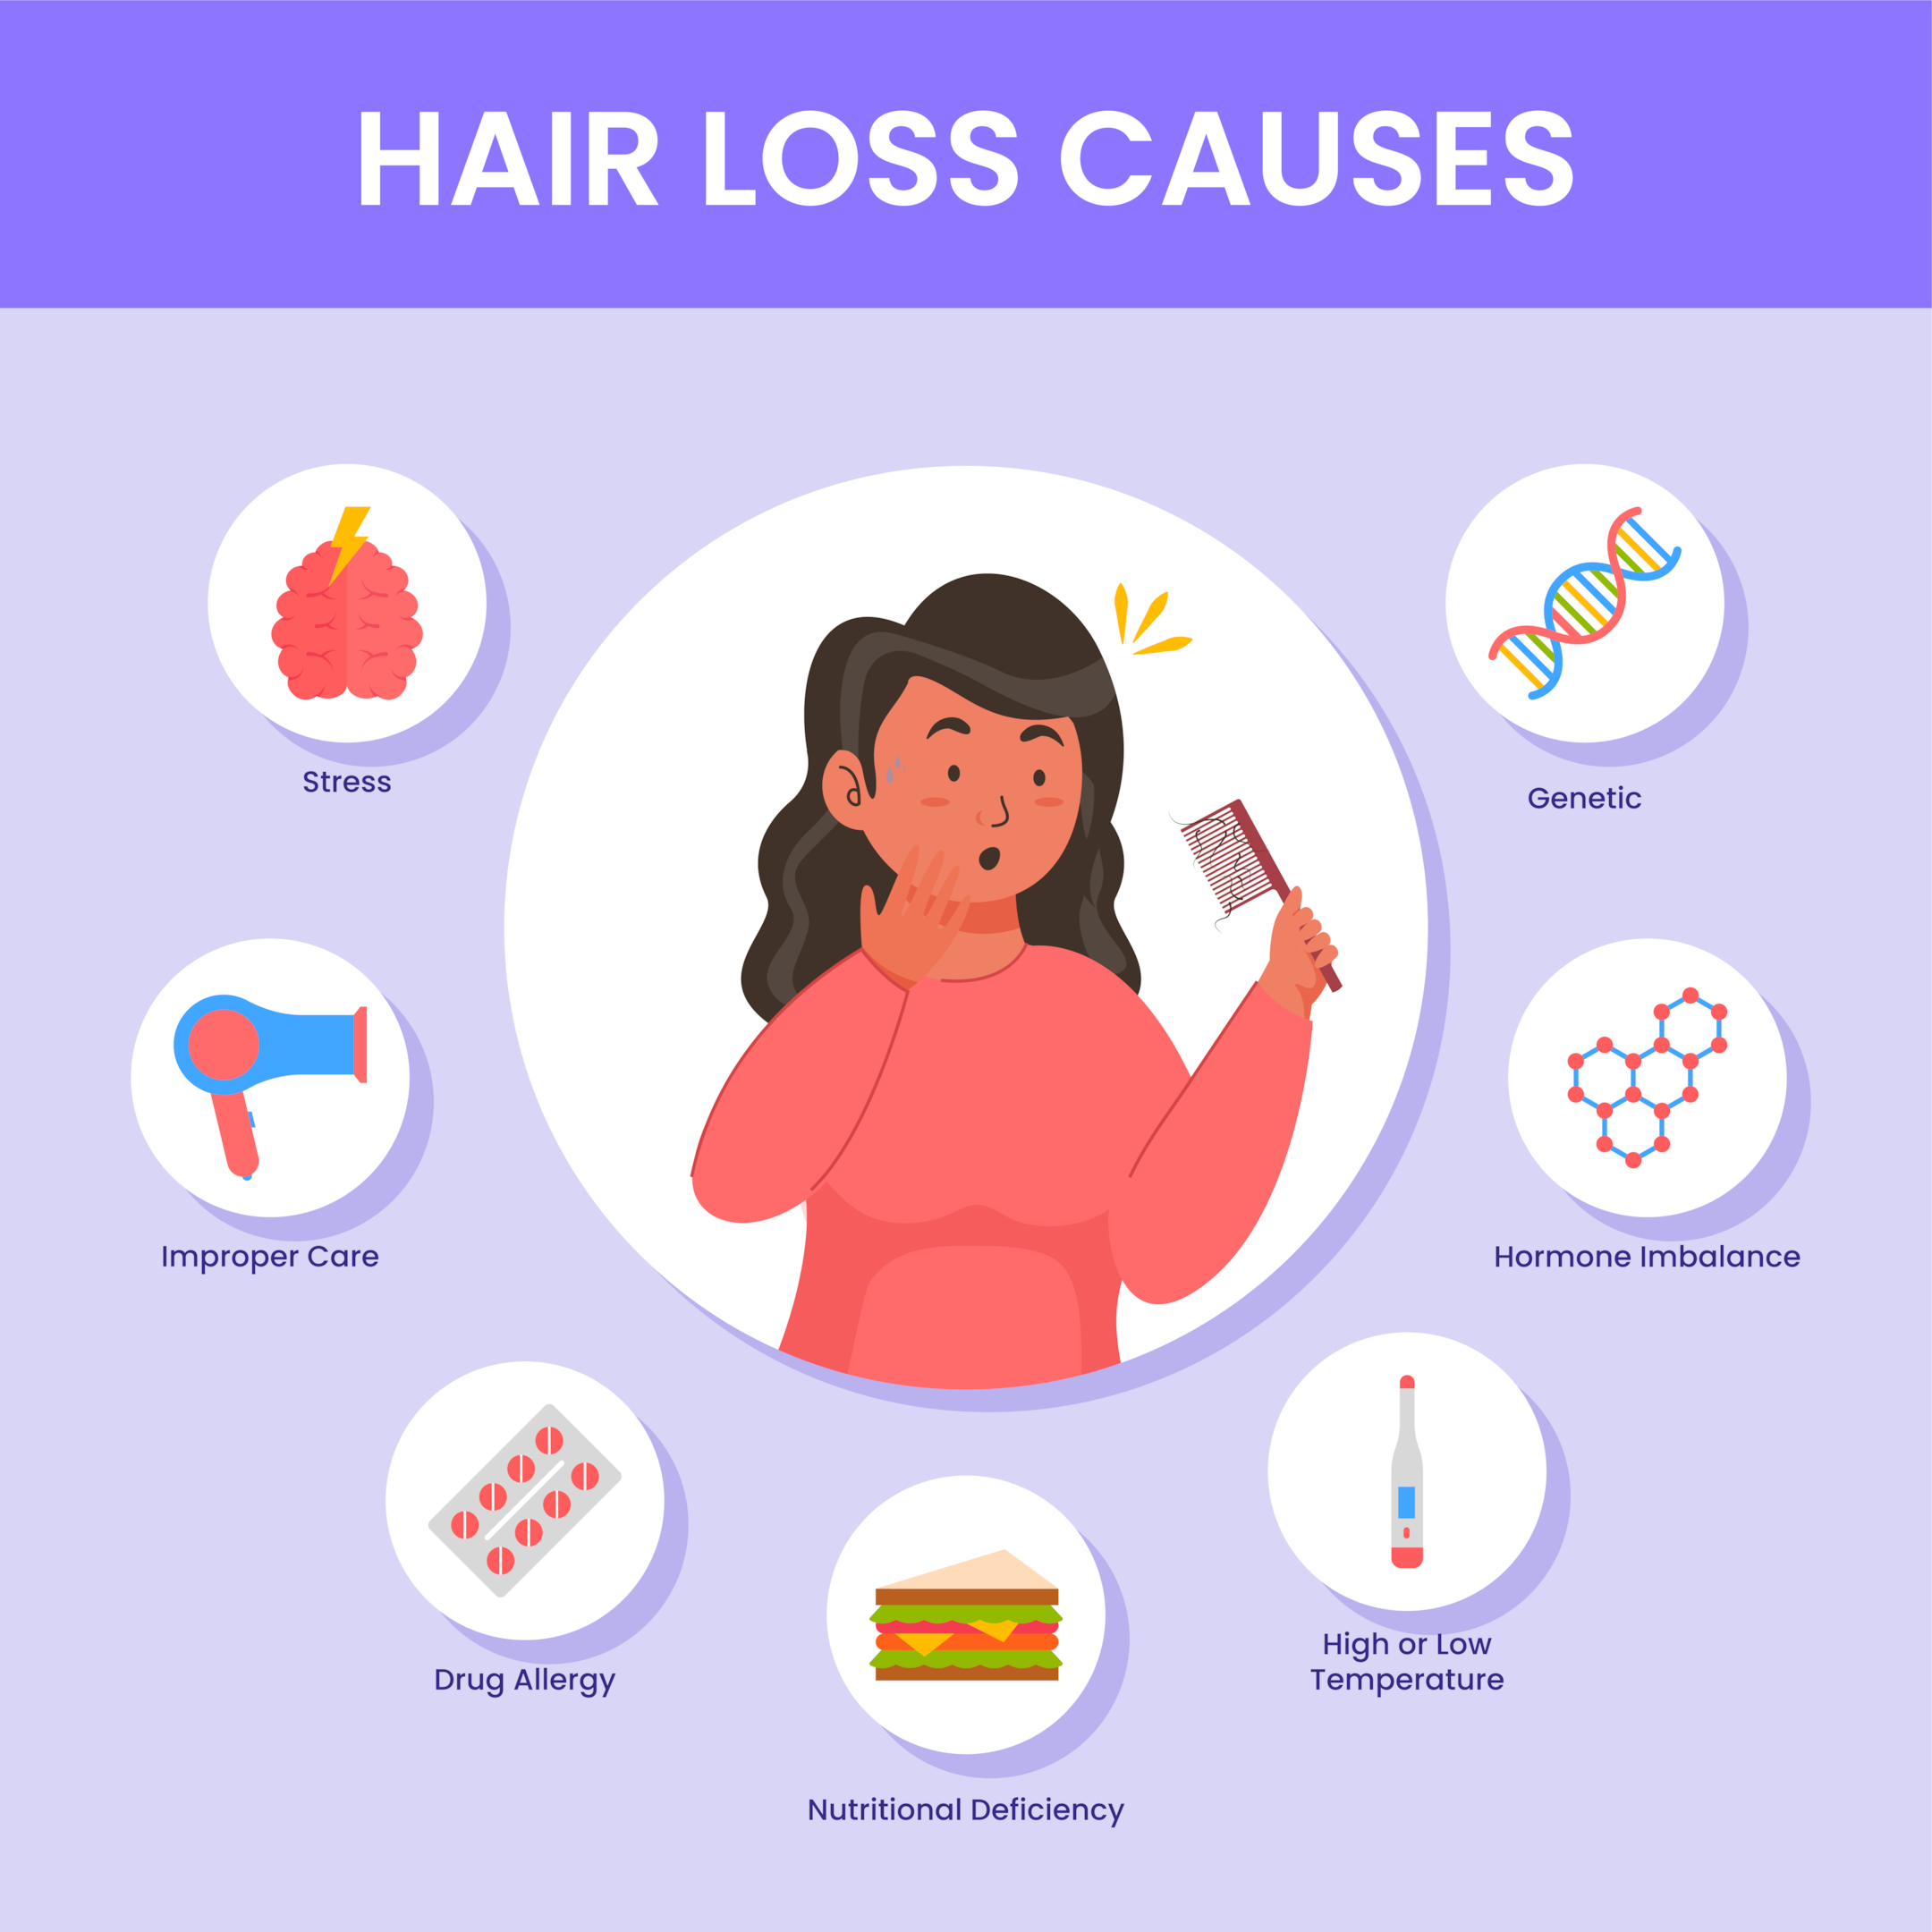 Hair loss is a multi-factorial issue.